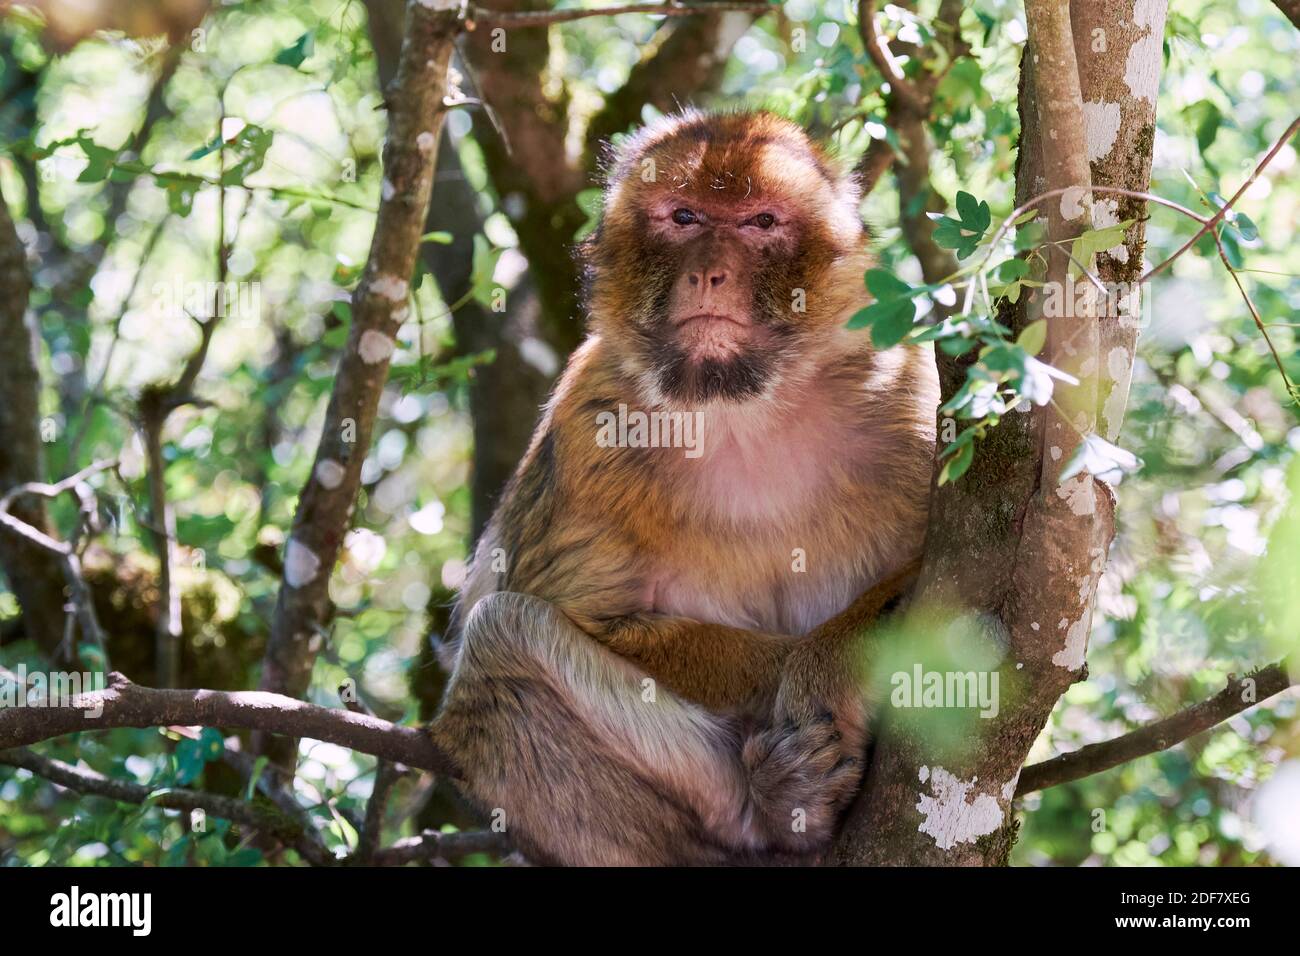 France, Lot, Rocamadour, Foret des Singes, Barbary Macaque also called Barbary ape or Magot (Macaca sylvanus), native from Morocco, portrait Stock Photo